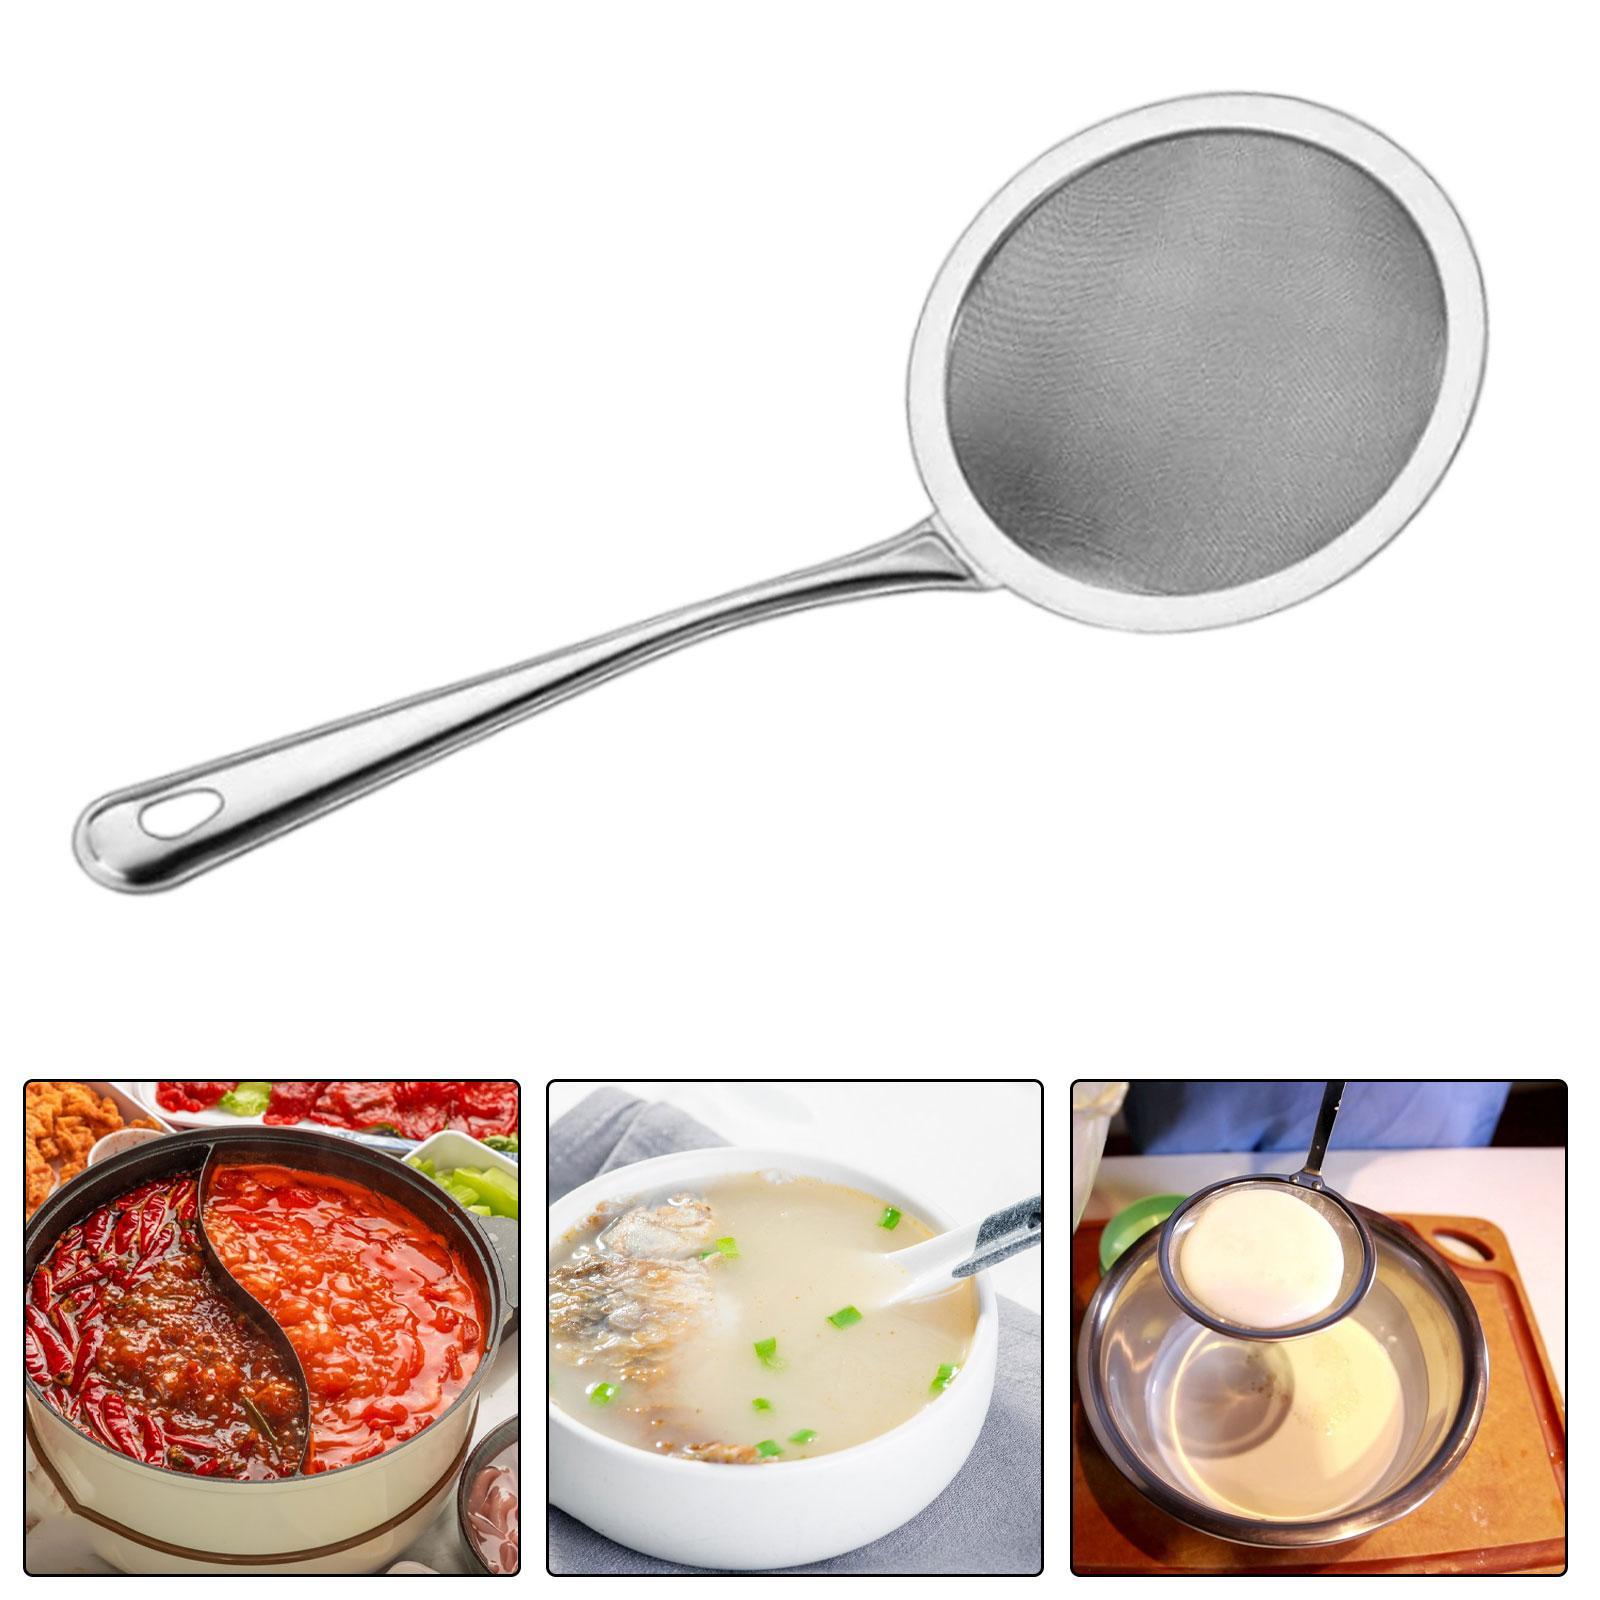 Food Strainer 100 Mesh Comfortable Grip Sieve Sifter for Juice Rice Skimming